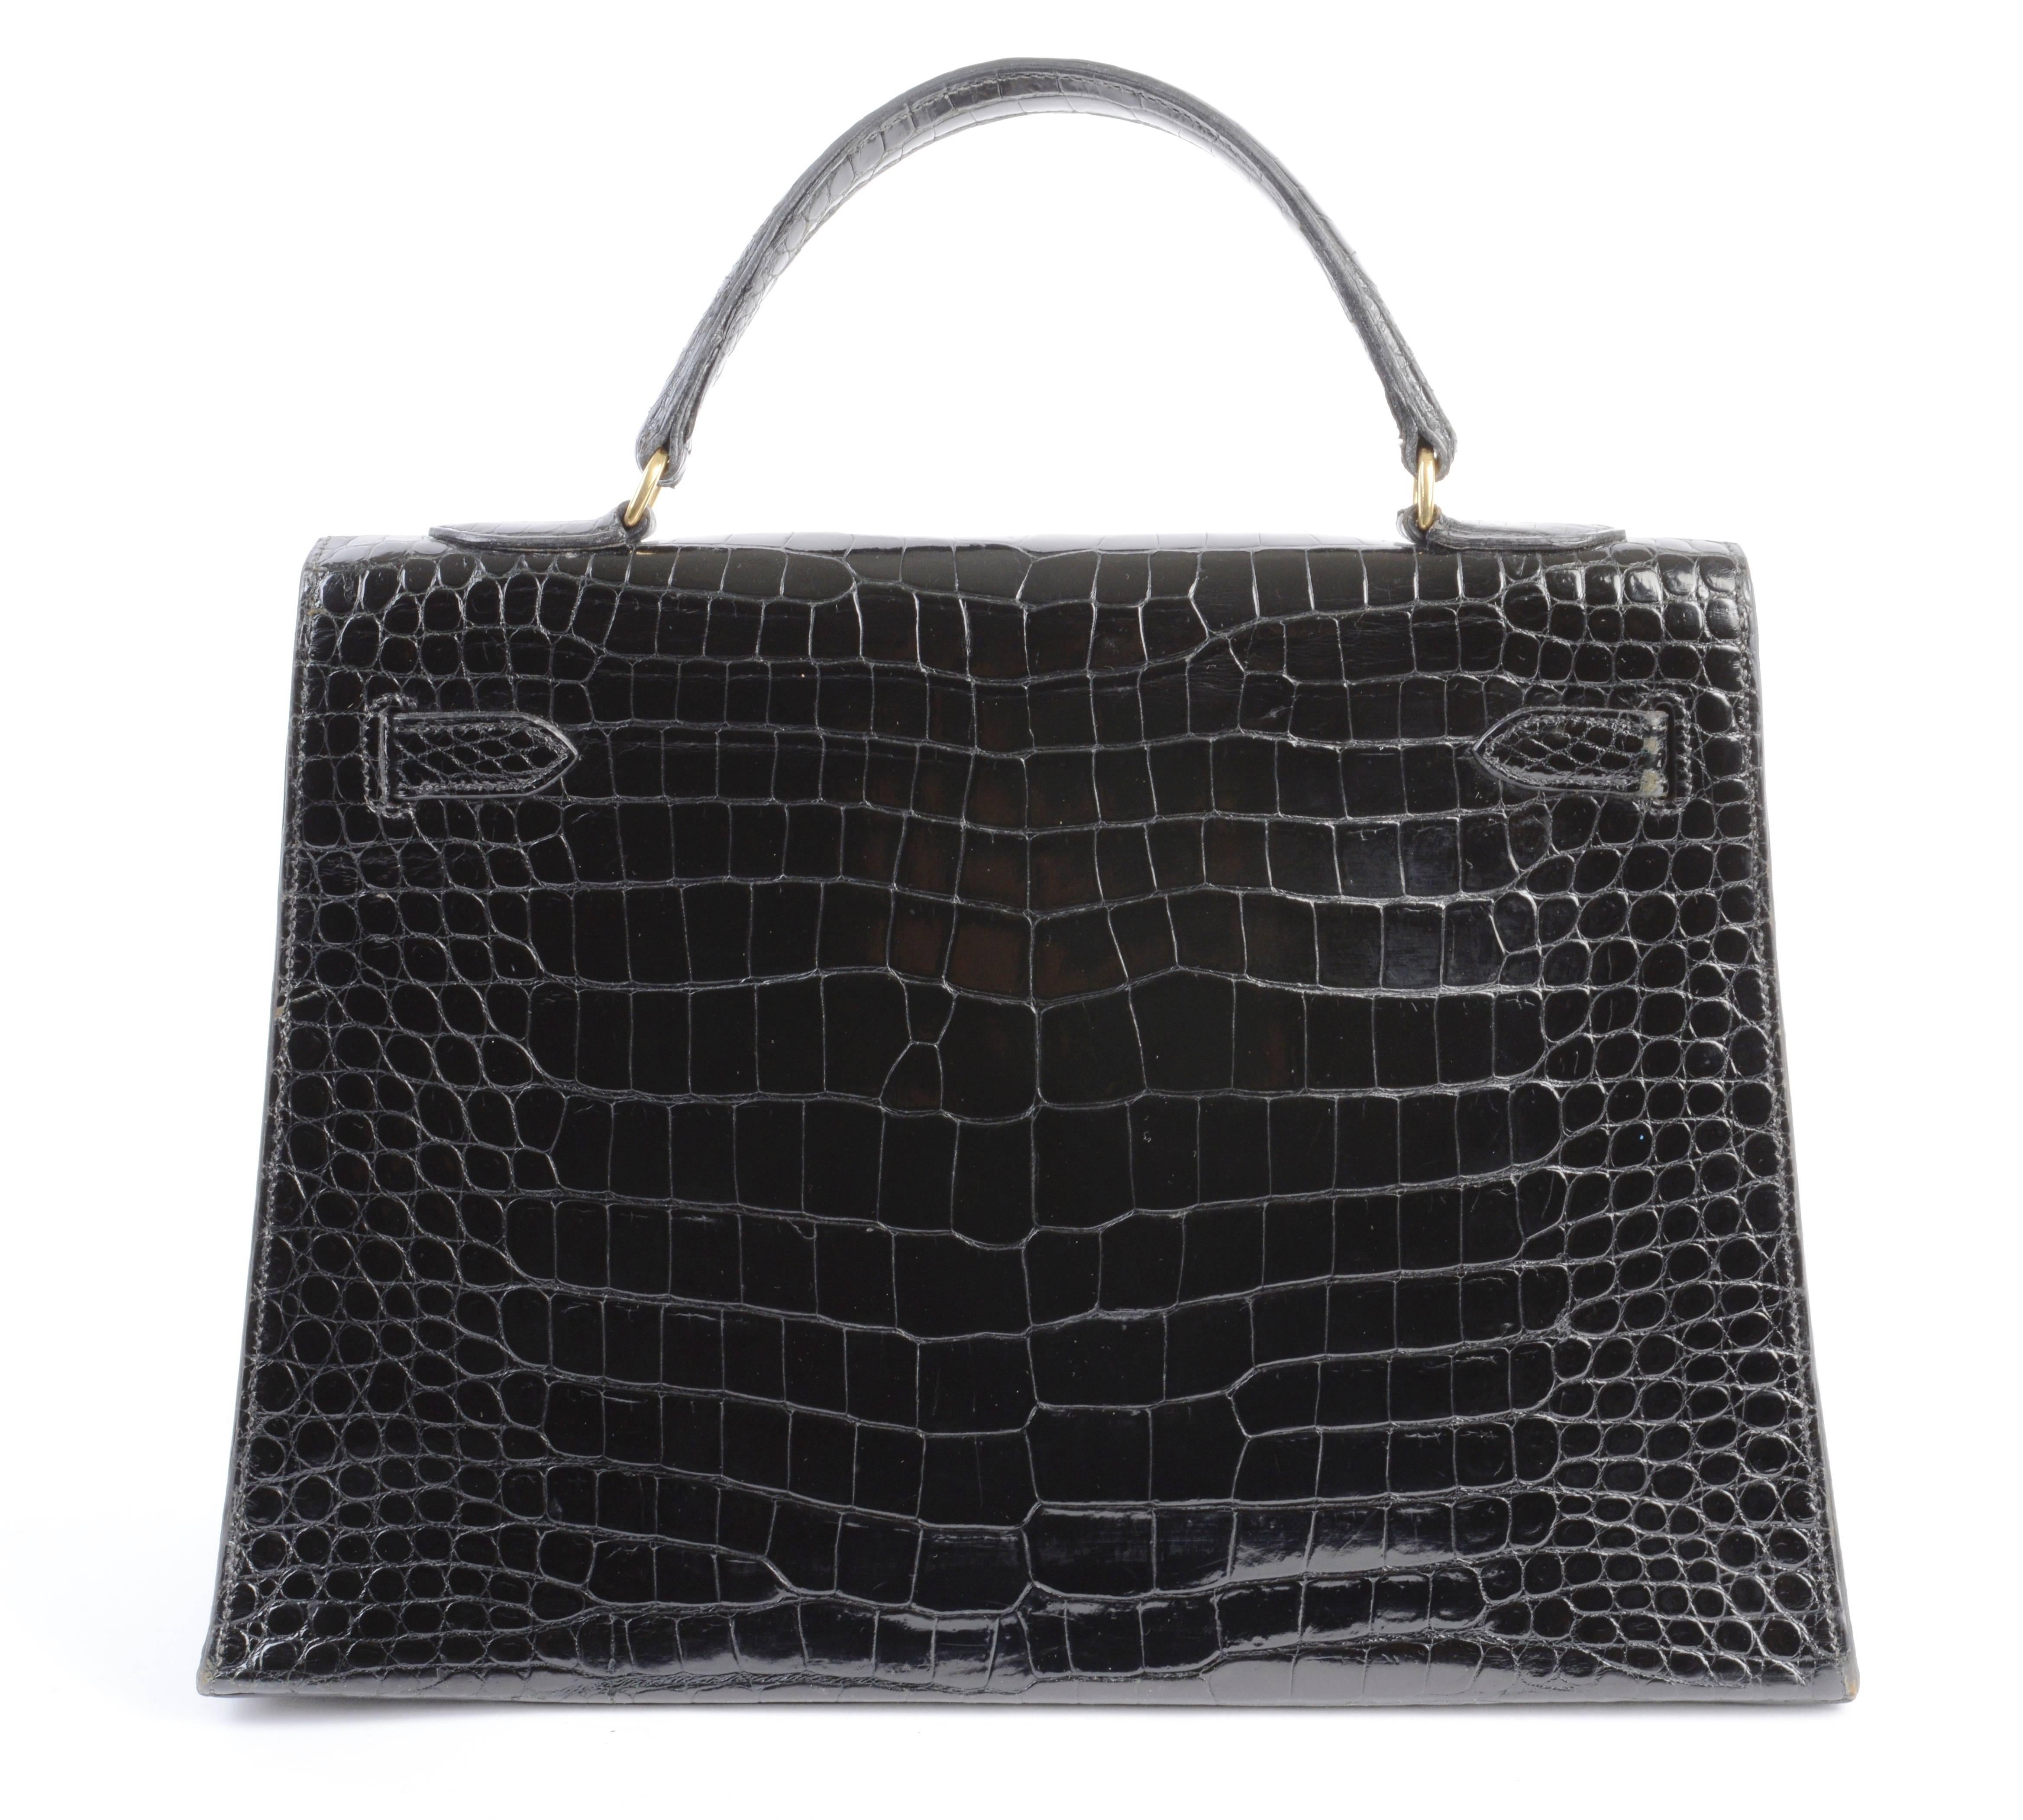 Hermes 32cm Shiny Black Crocodile Sellier Kelly Bag with Gold Hardware
Circa 1950's. This Kelly bag is classic, refined, and elegant. The bag has been a staple luxury accessory since its introduction in the 1930s. This particular Kelly is stunning.